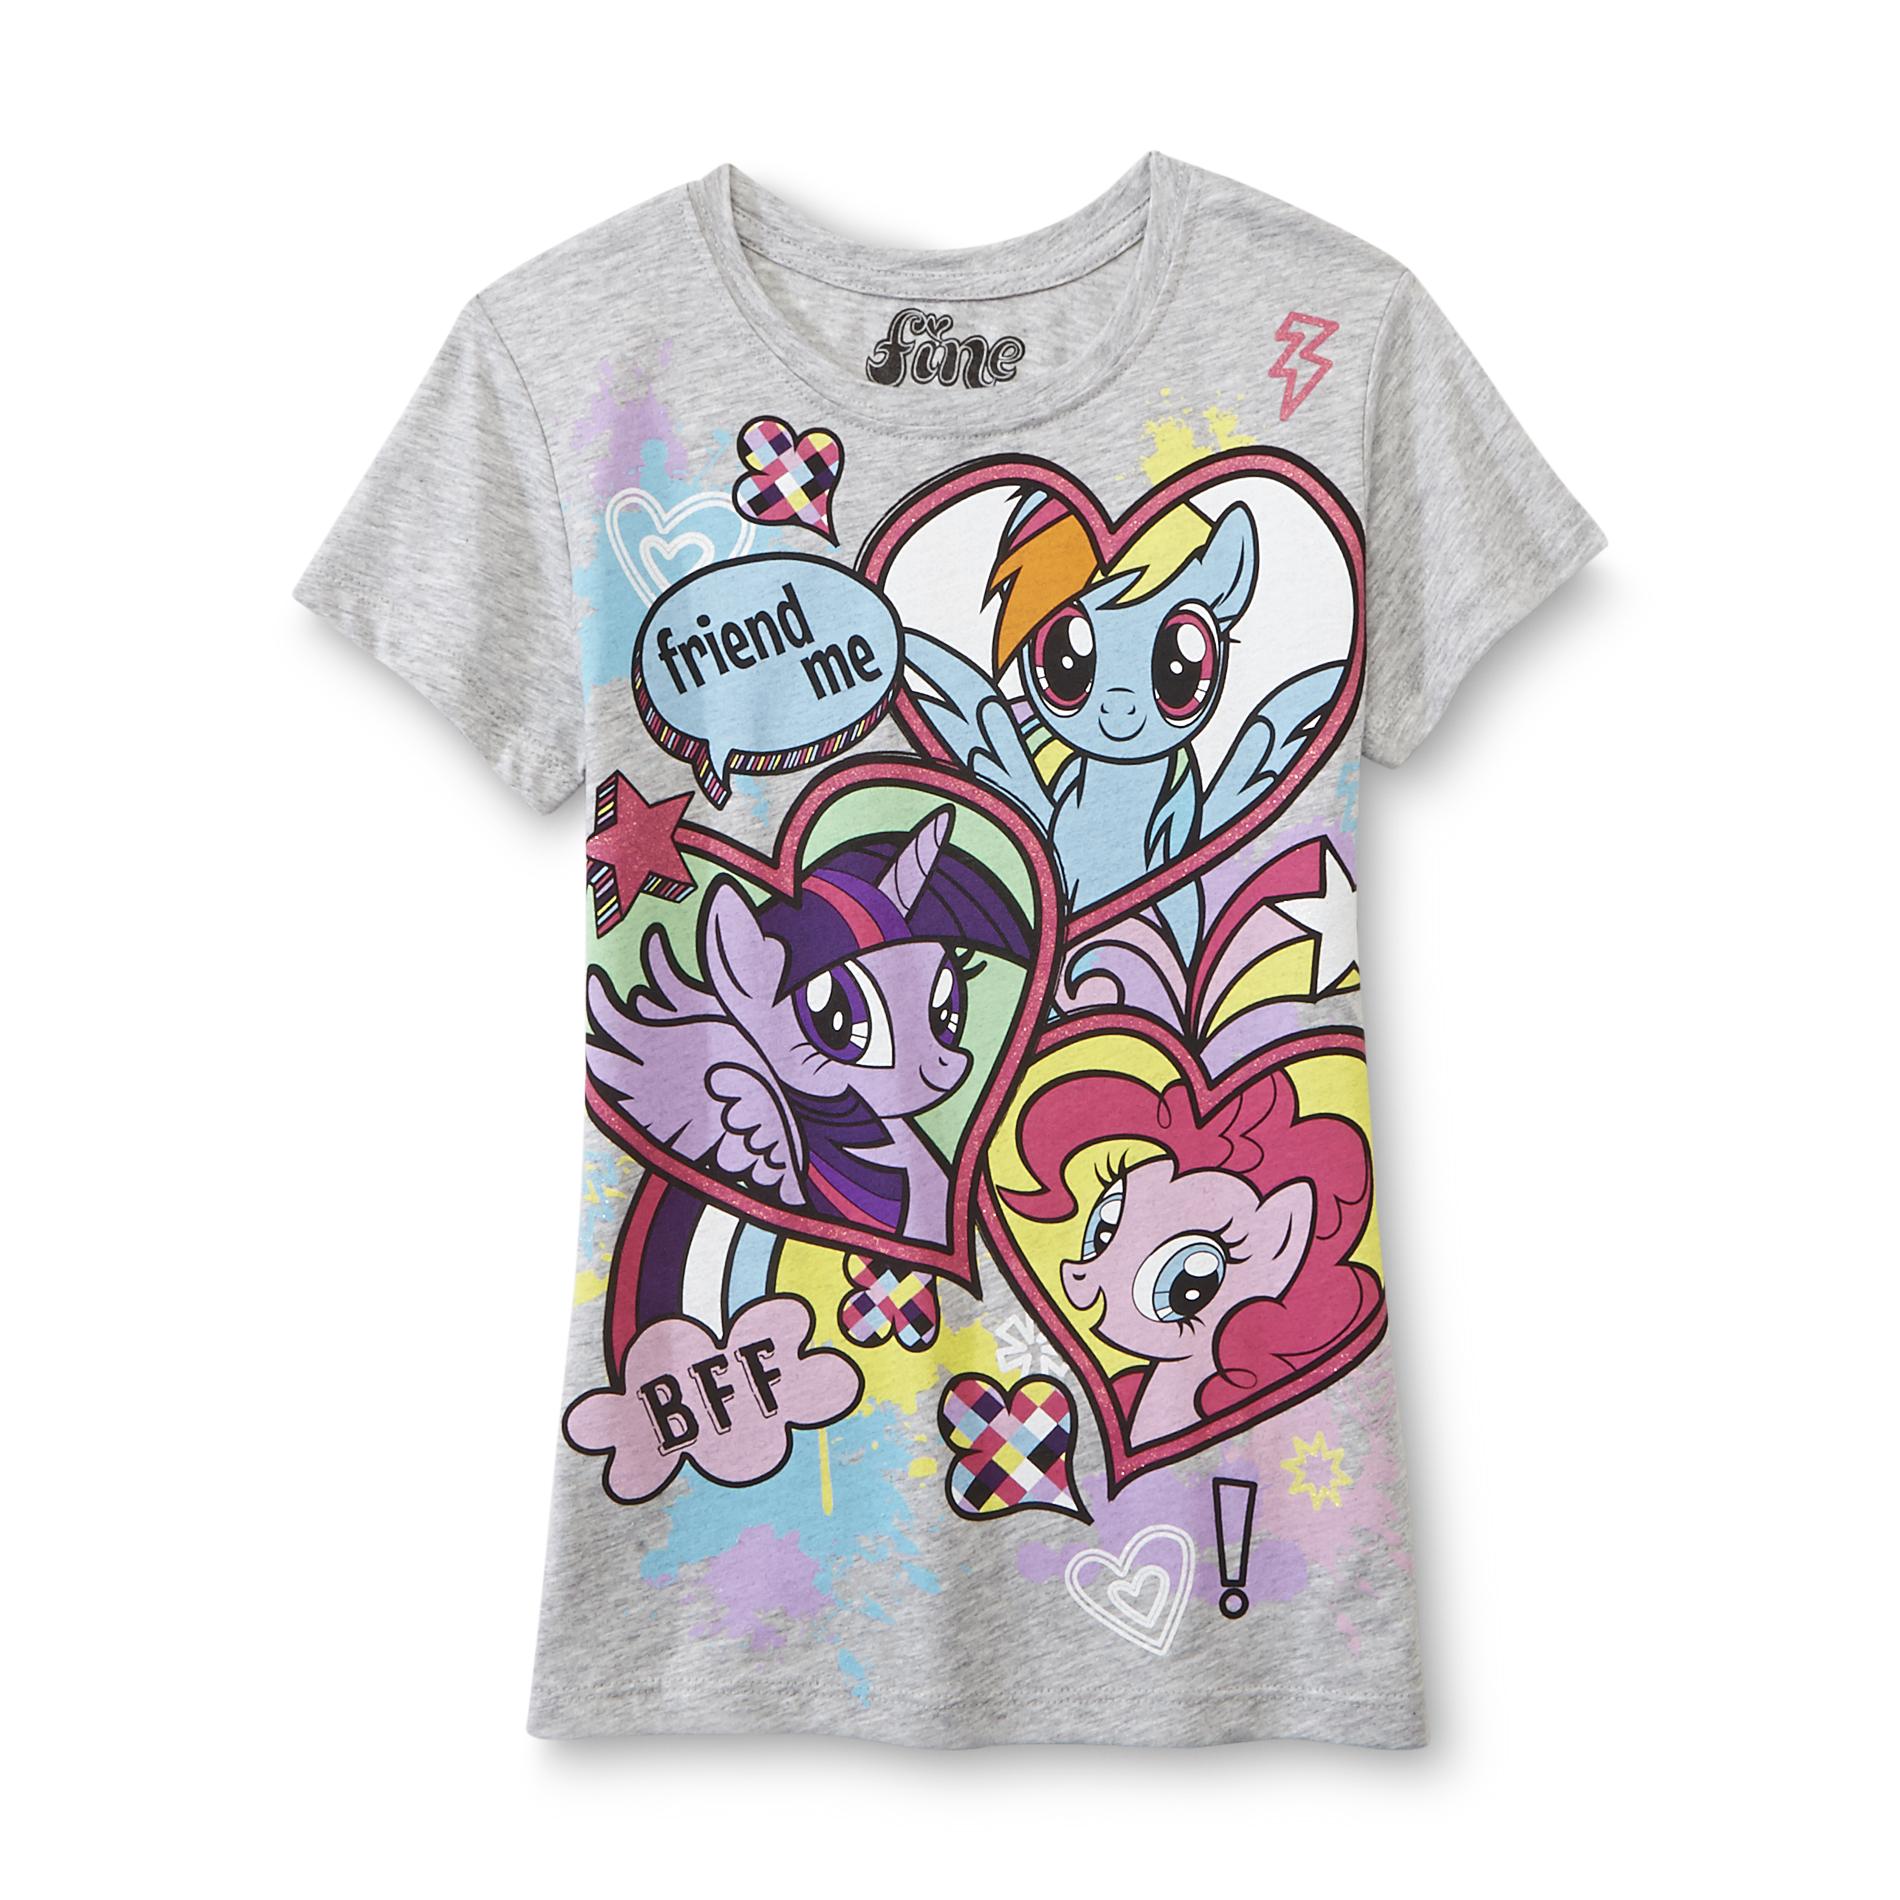 My Little Pony Girl's Glittered Graphic T-Shirt - Friend Me